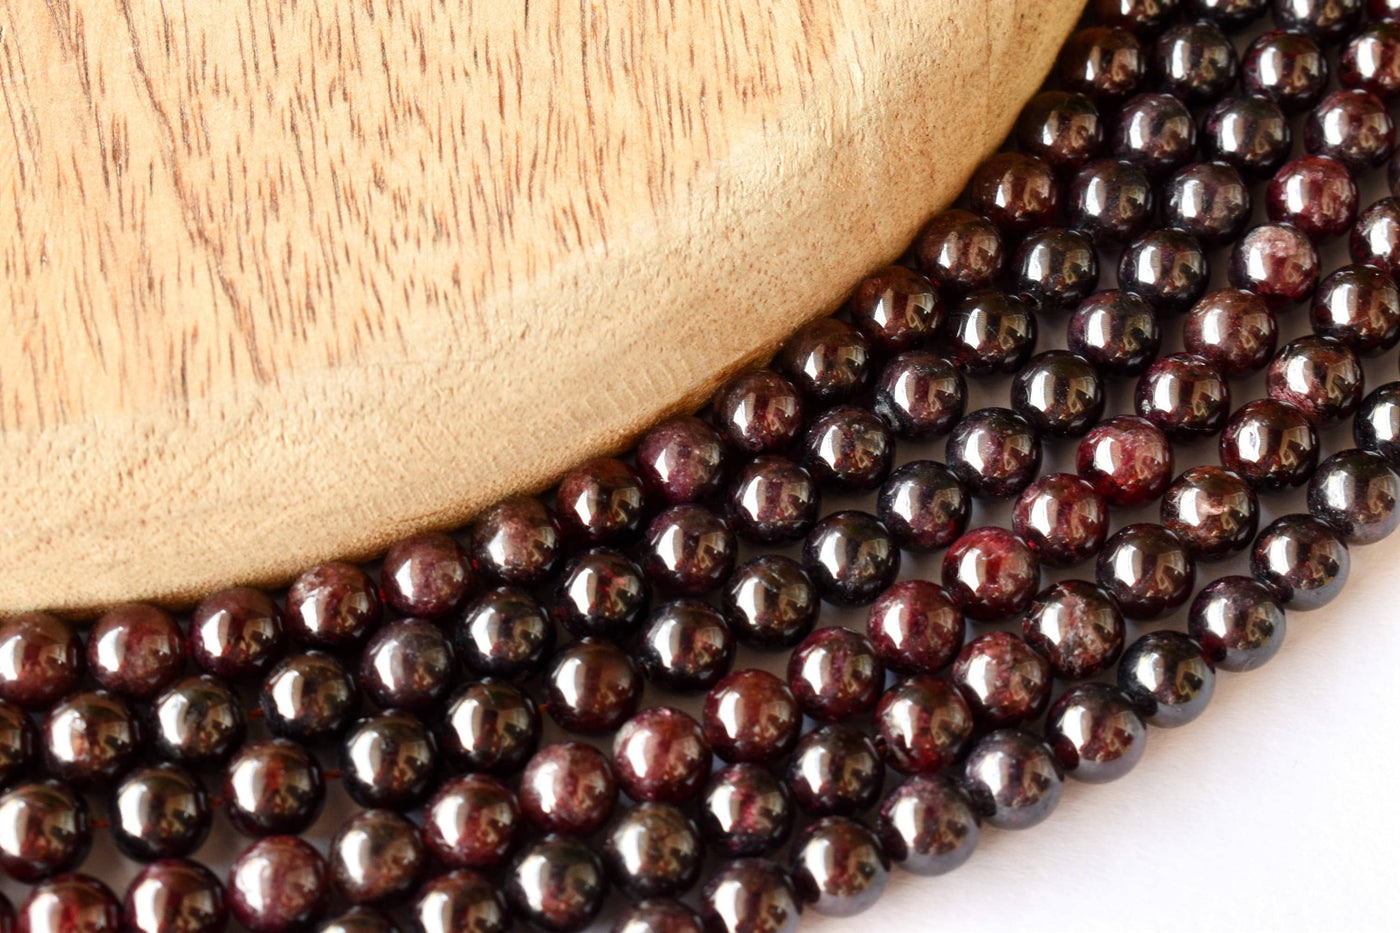 Garnet Beads, Natural Round Crystal Beads 4mm to 12mm